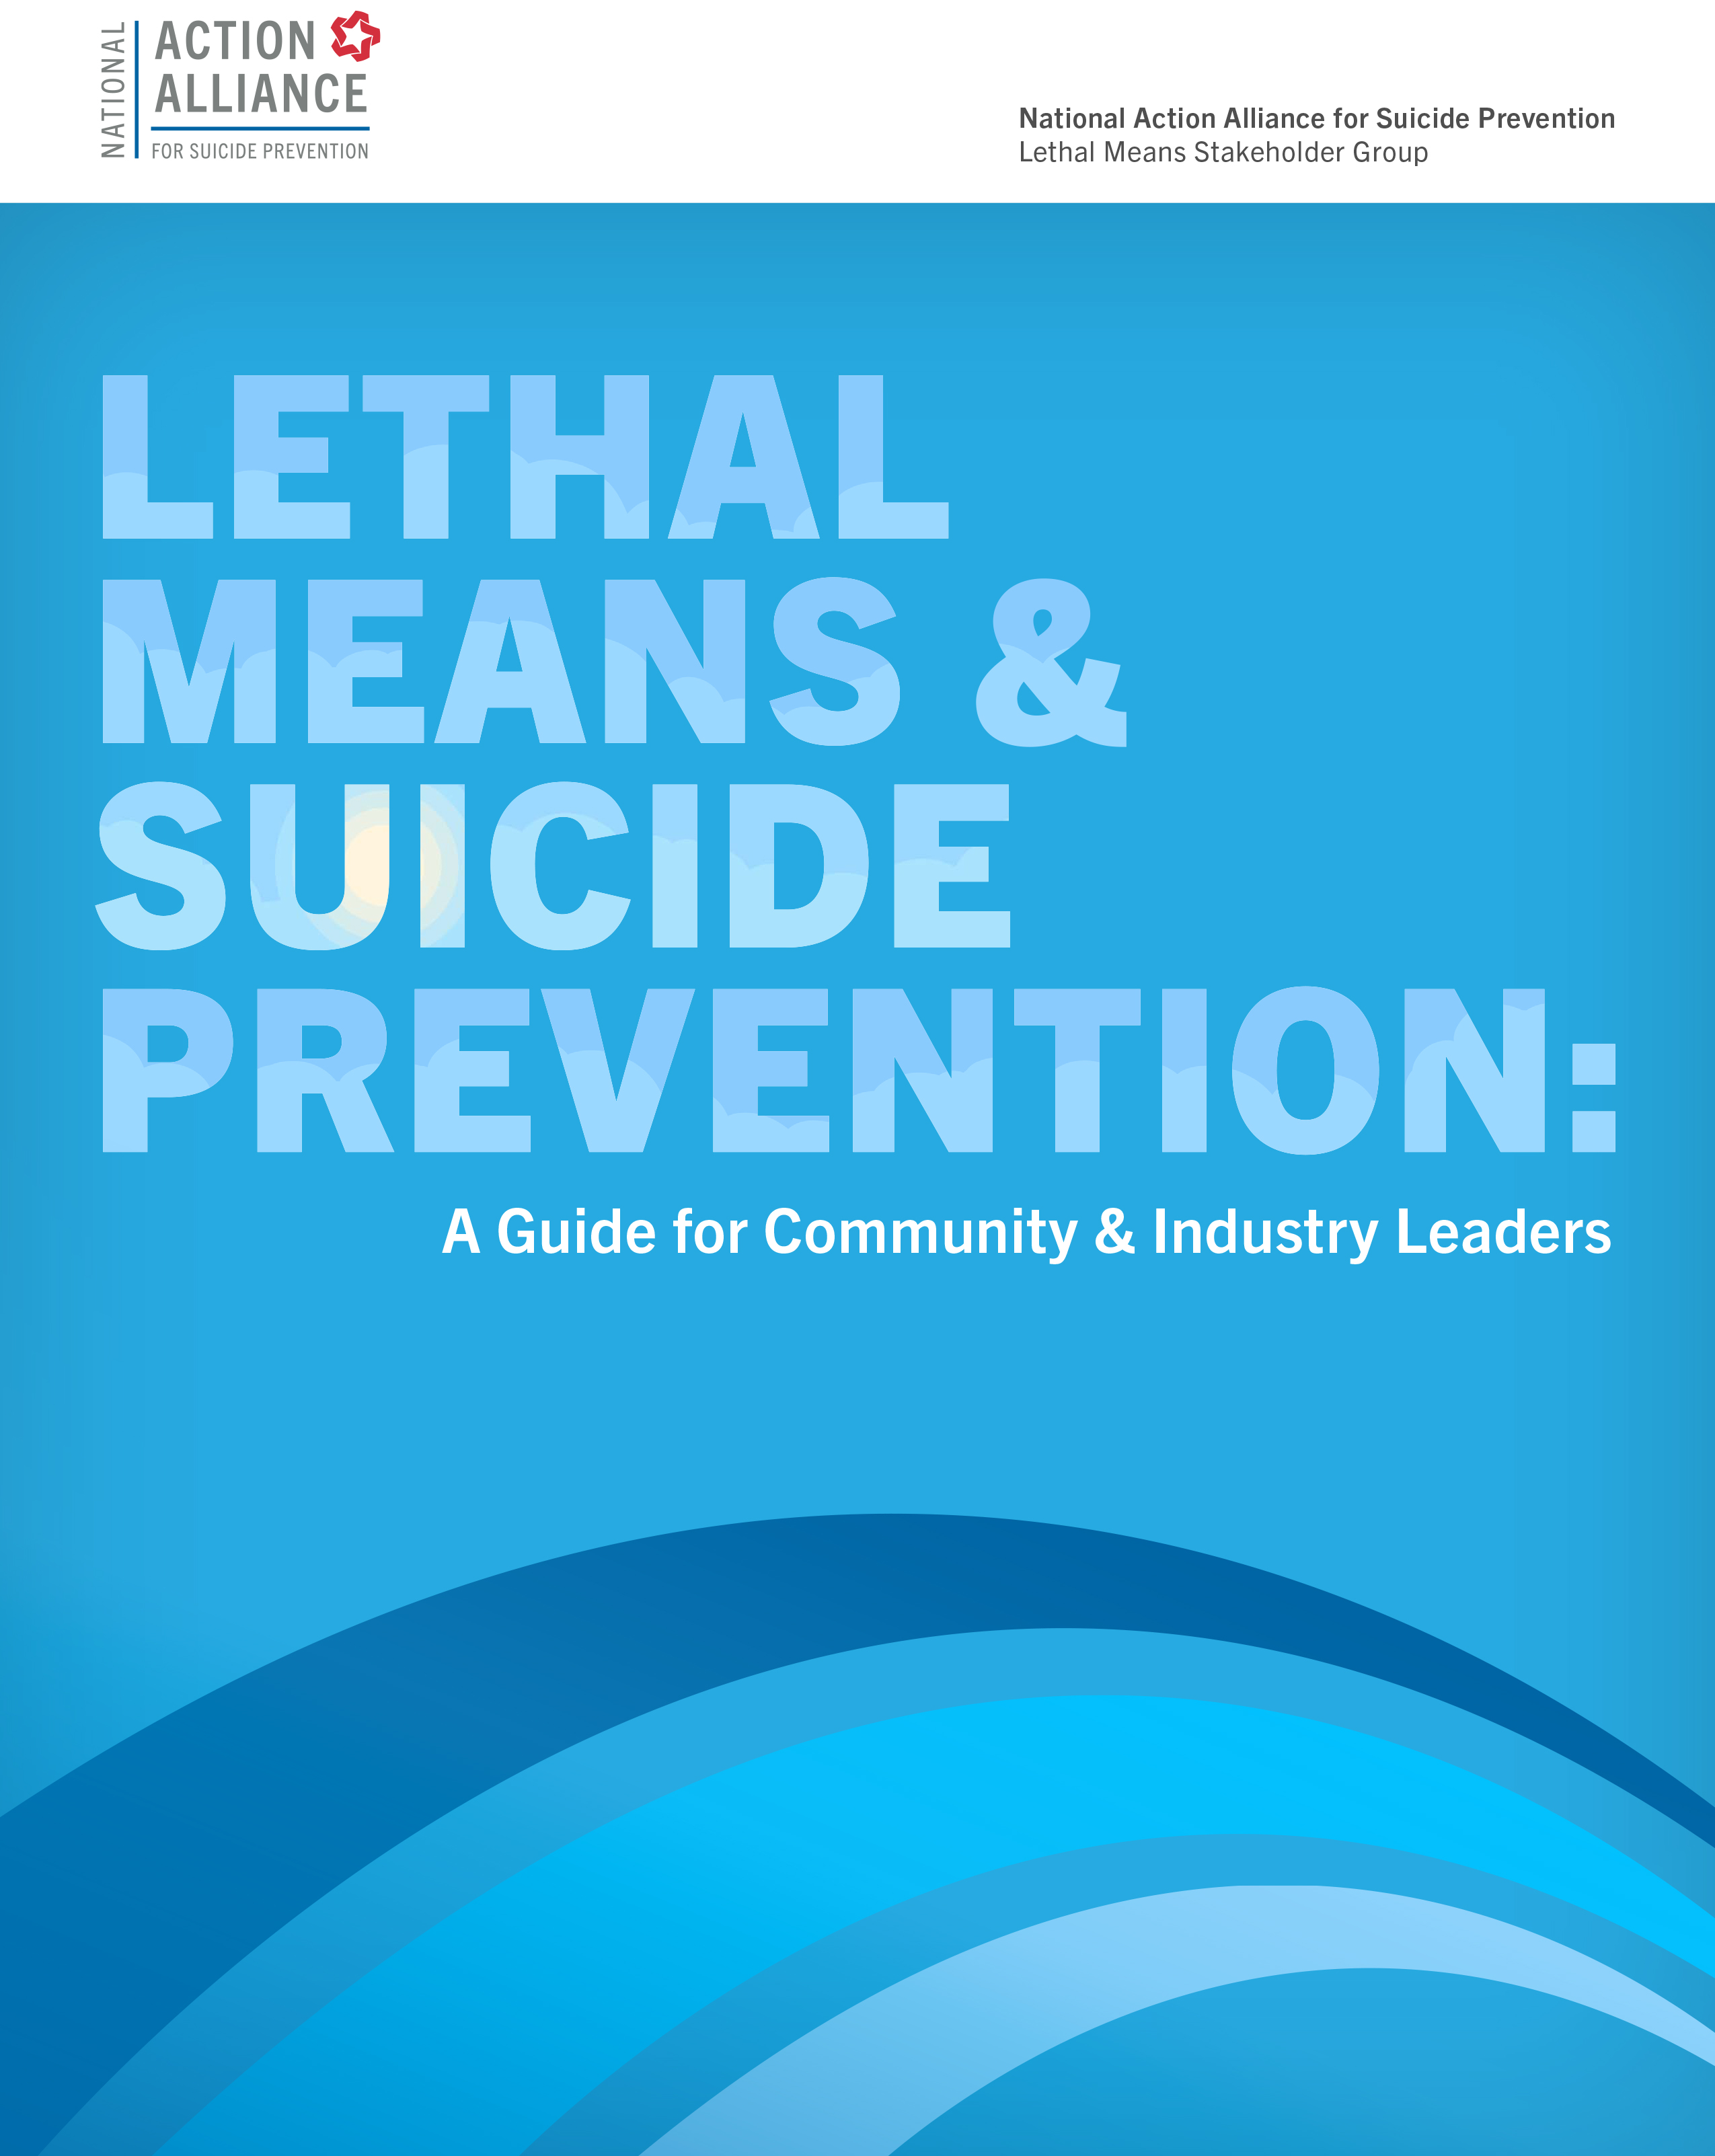 Lethal Means & Suicide Prevention: A Guide for Community & Industry Leaders